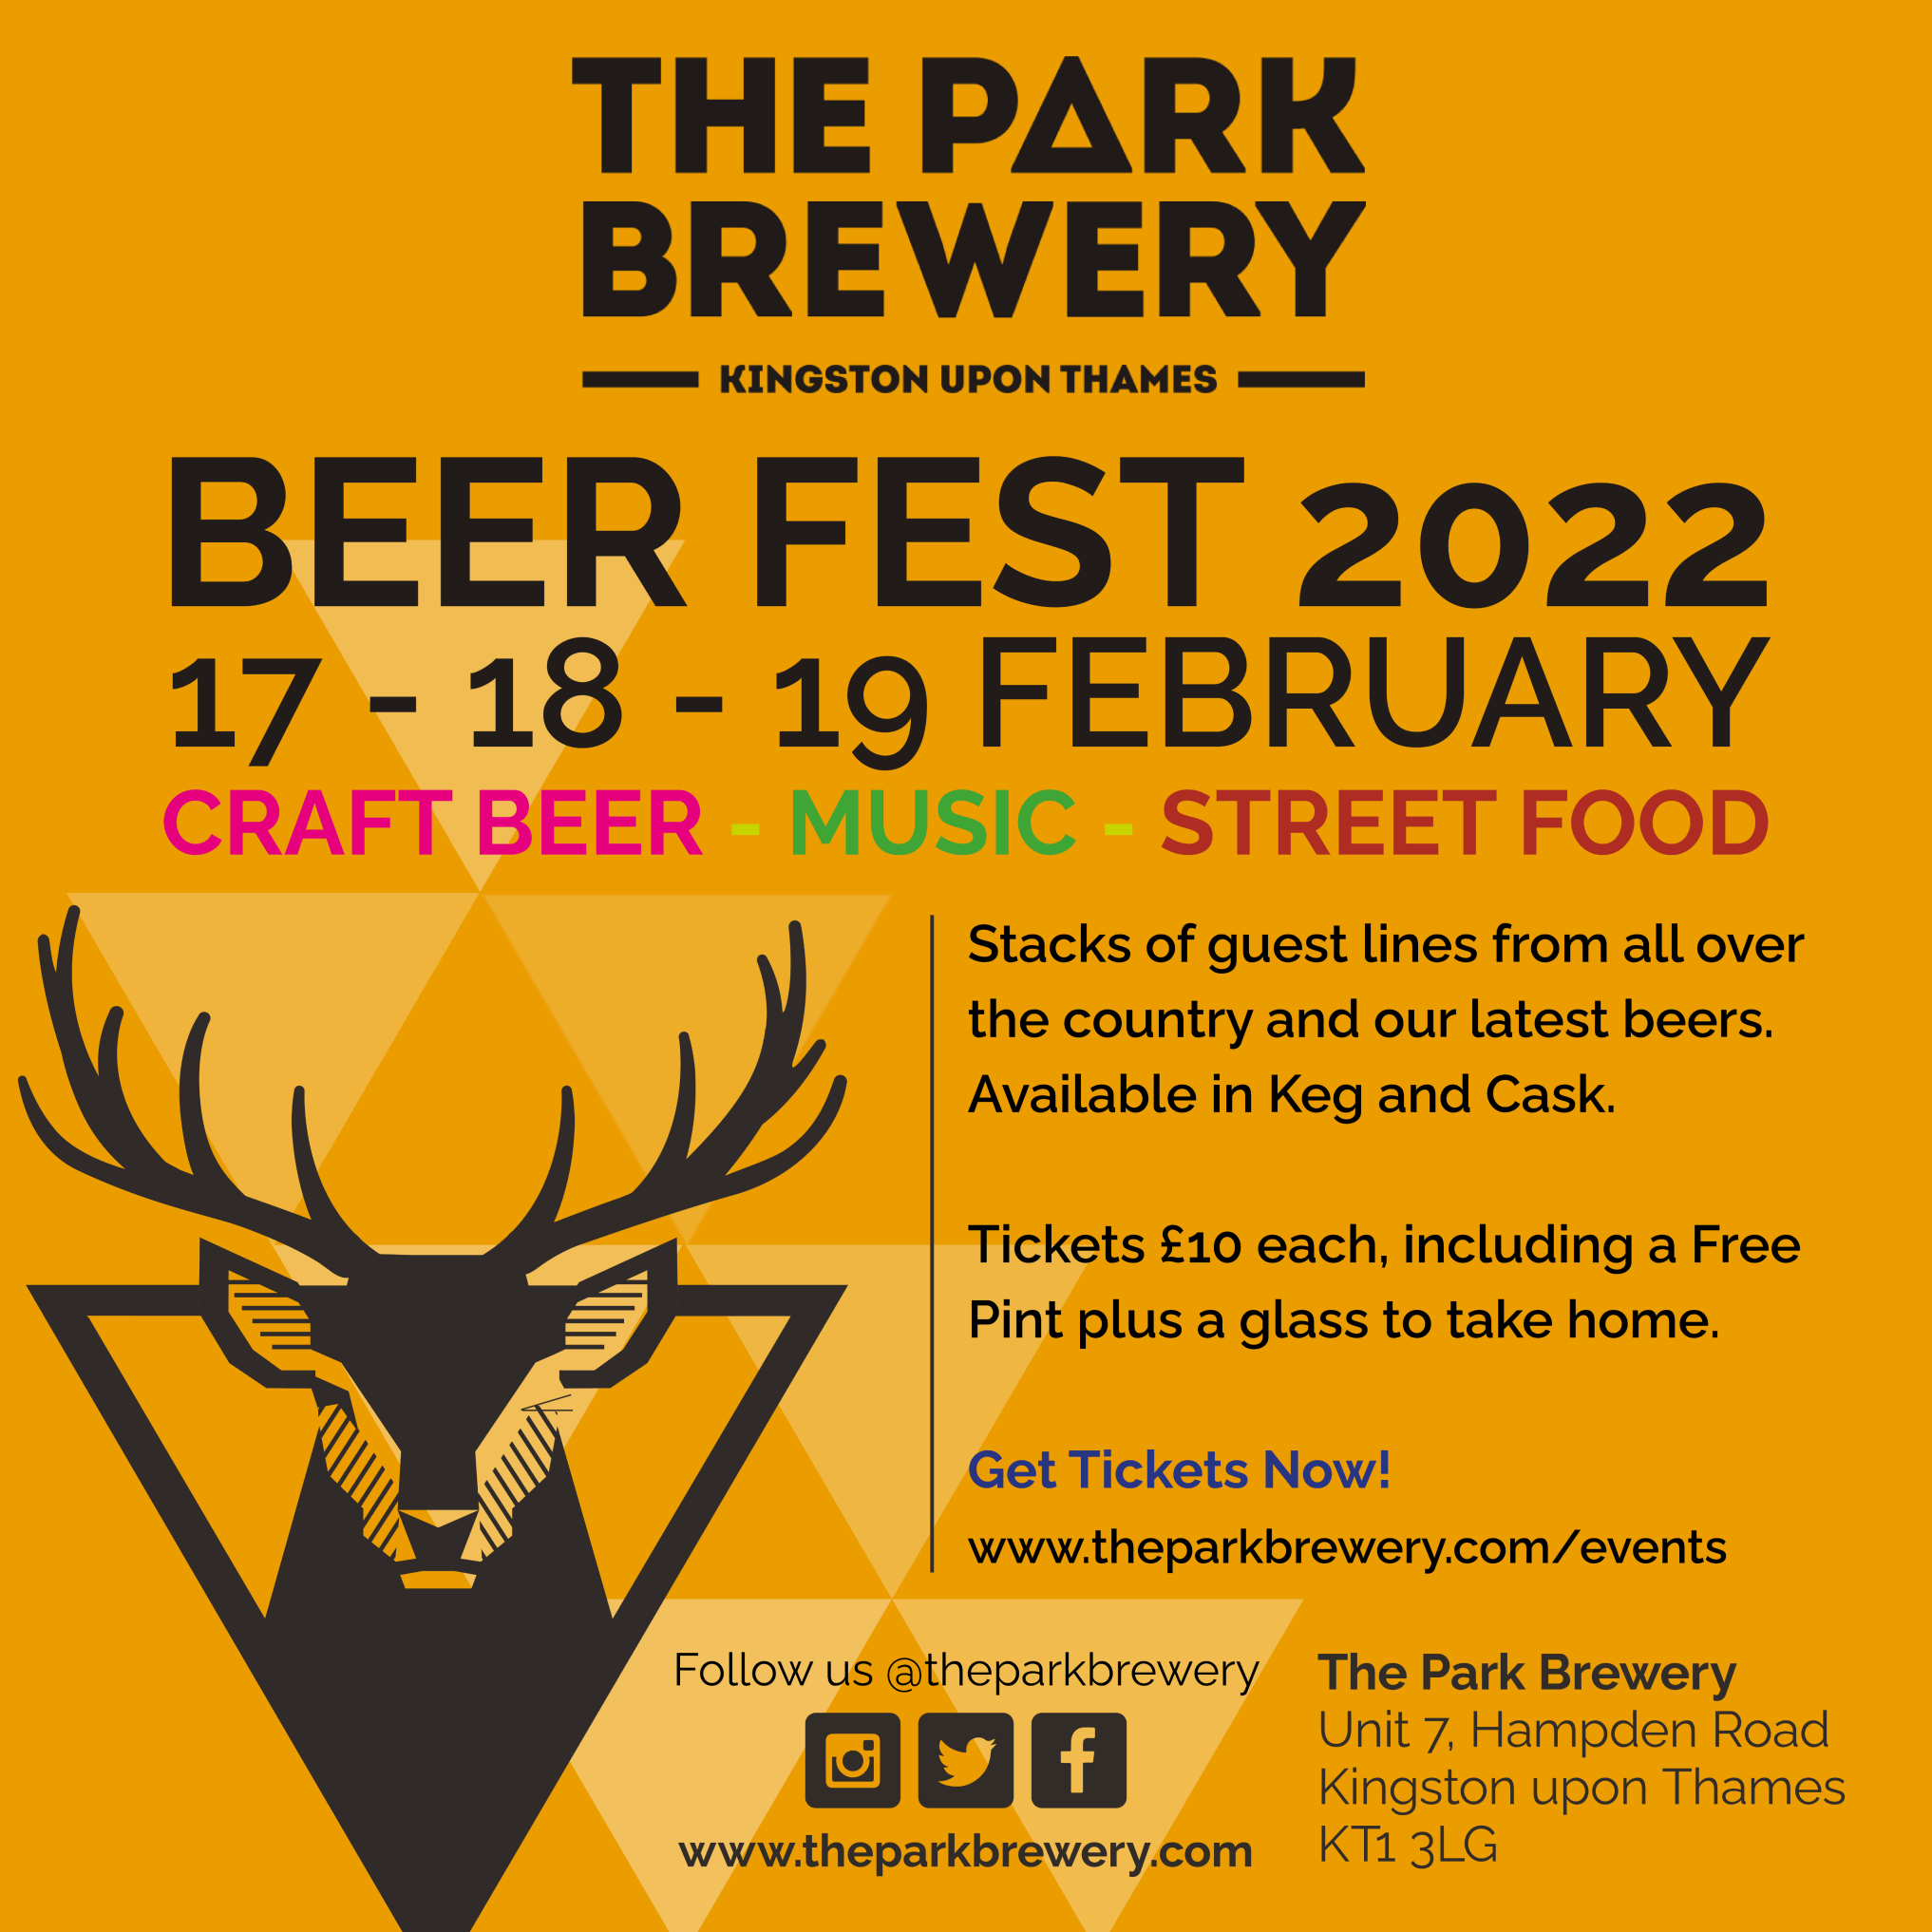 ANNOUNCEMENT!!! BEER FEST 2022 is coming to the Tap Room The Park Brewery